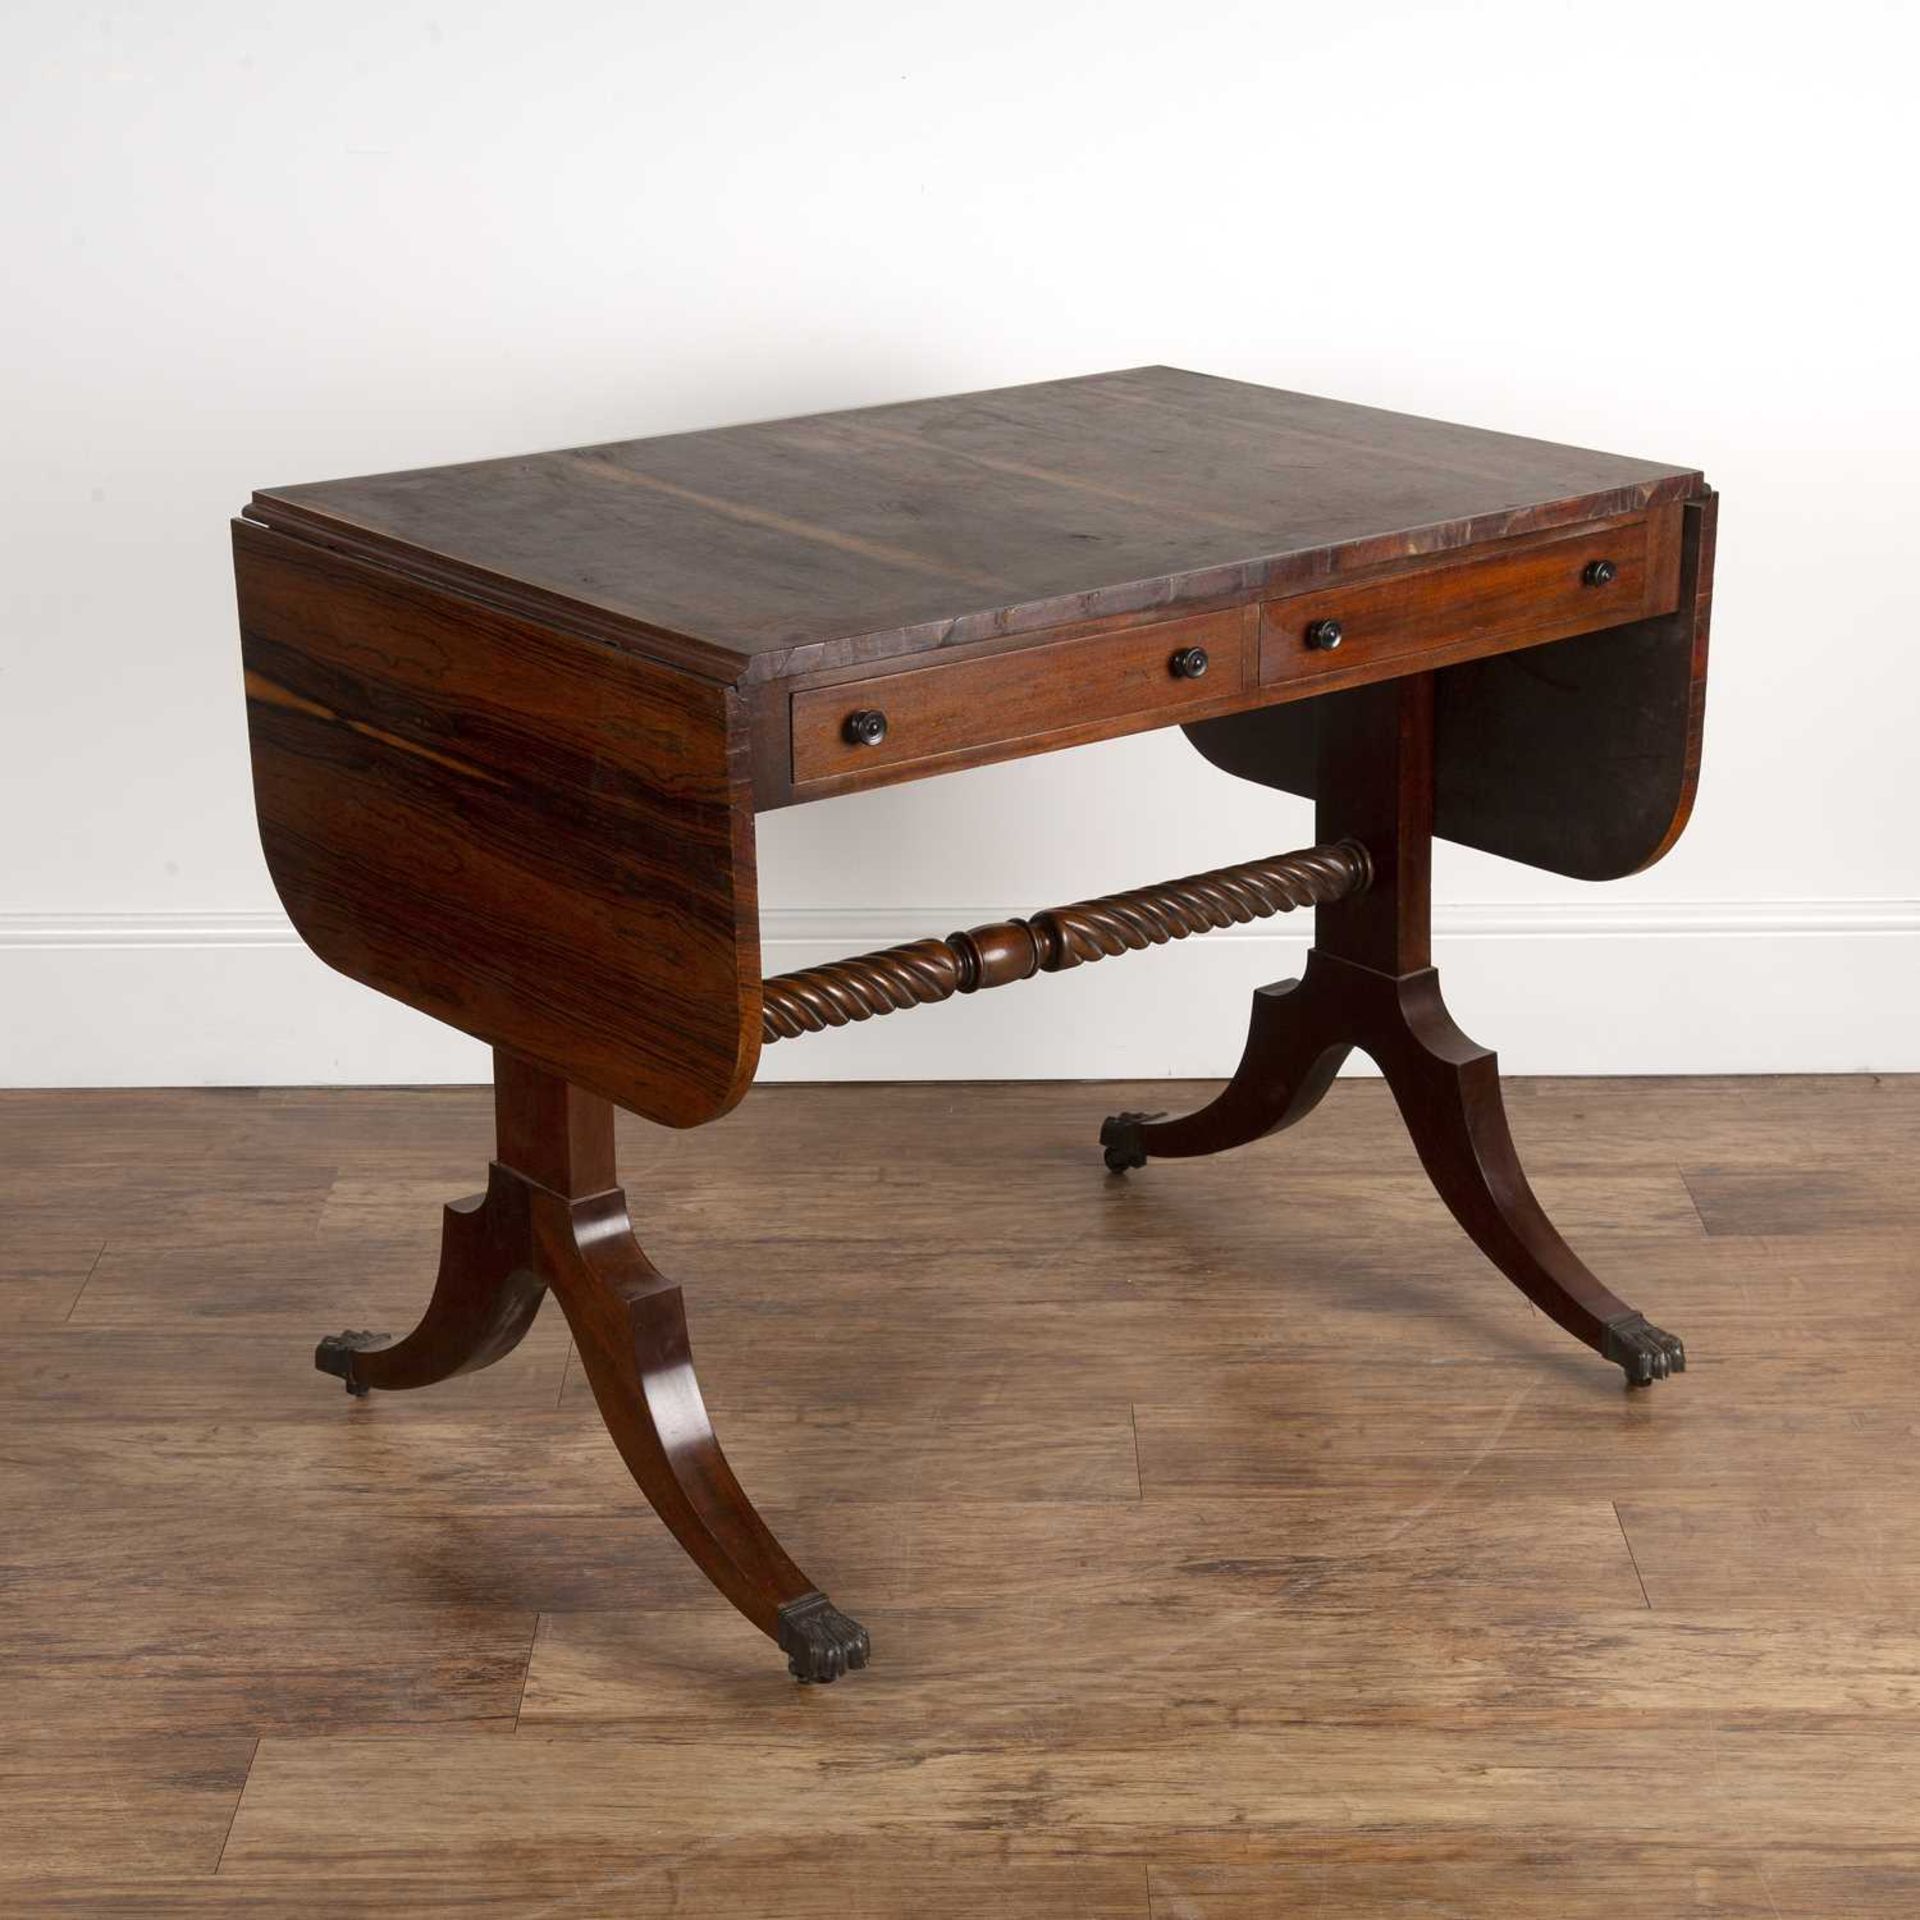 Rosewood veneered and mahogany sofa table in the Regency style, fitted two drawers with ring